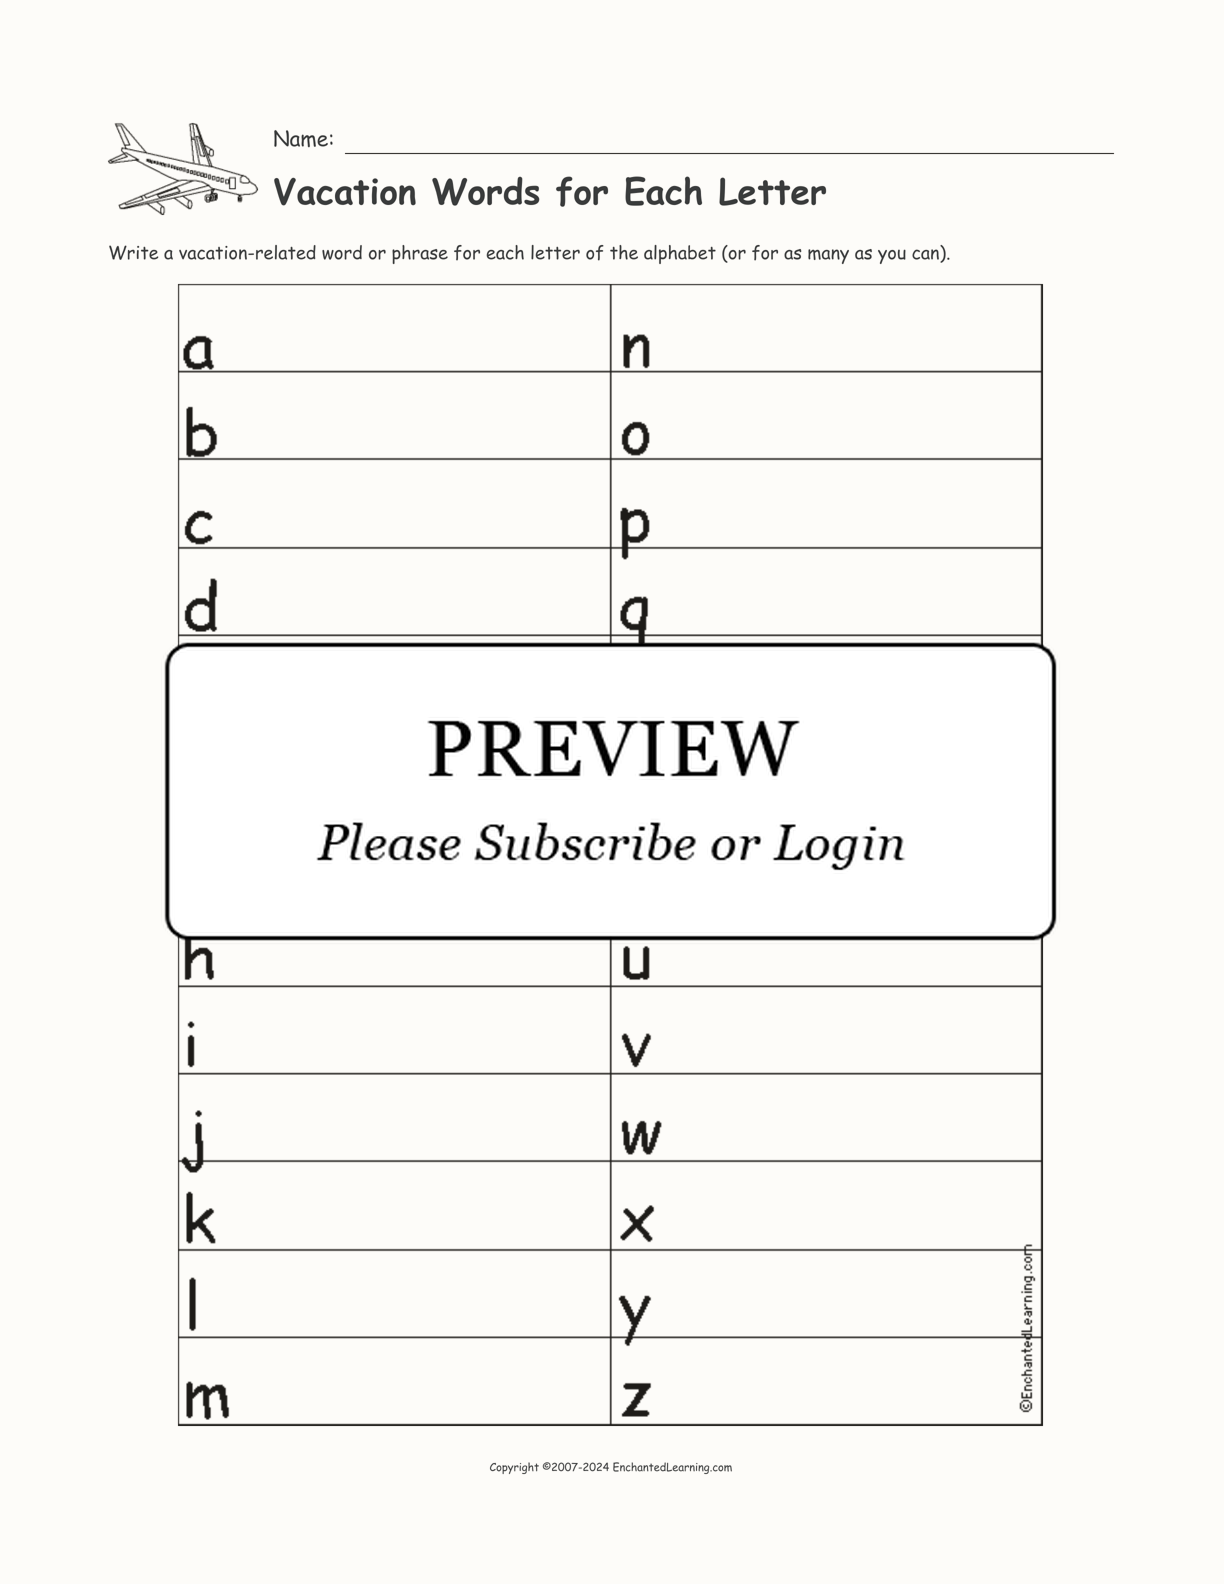 Vacation Words for Each Letter interactive worksheet page 1